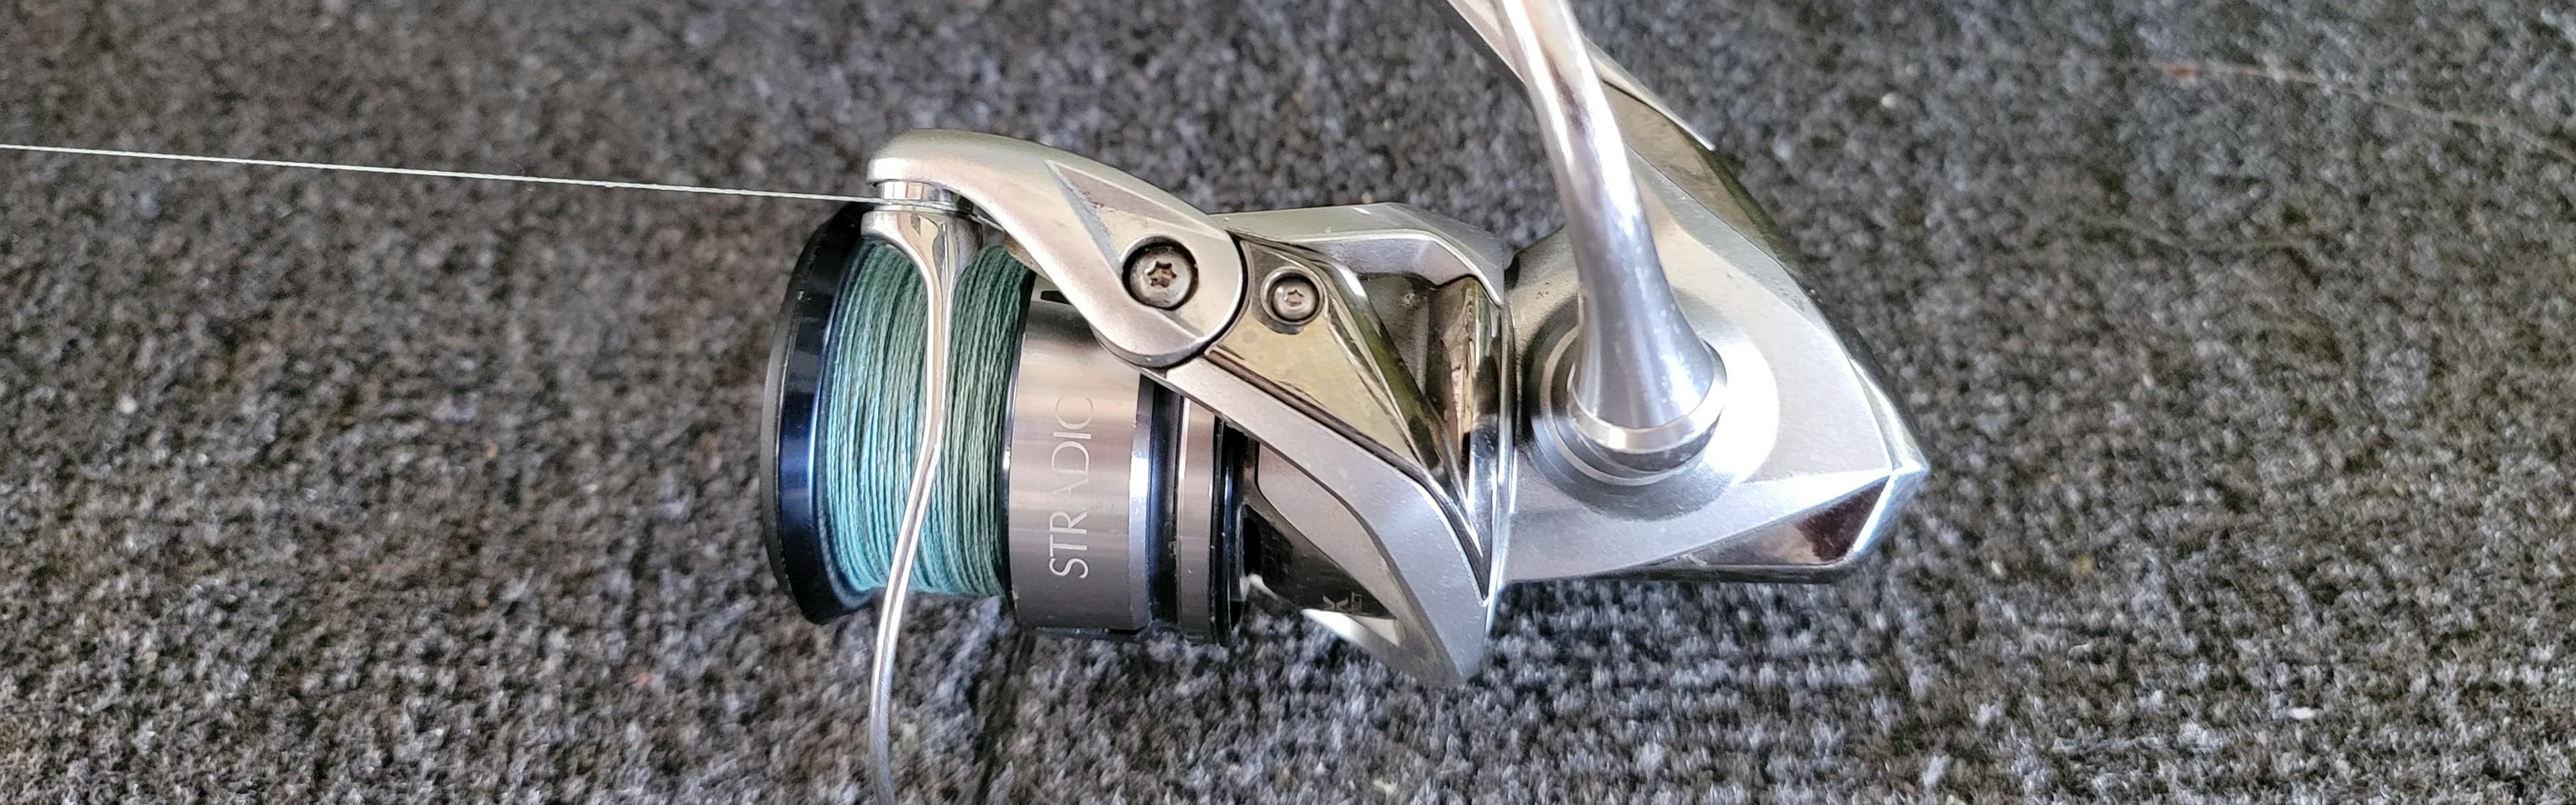 Expert Review: Daiwa Fuego LT Spinning Reel